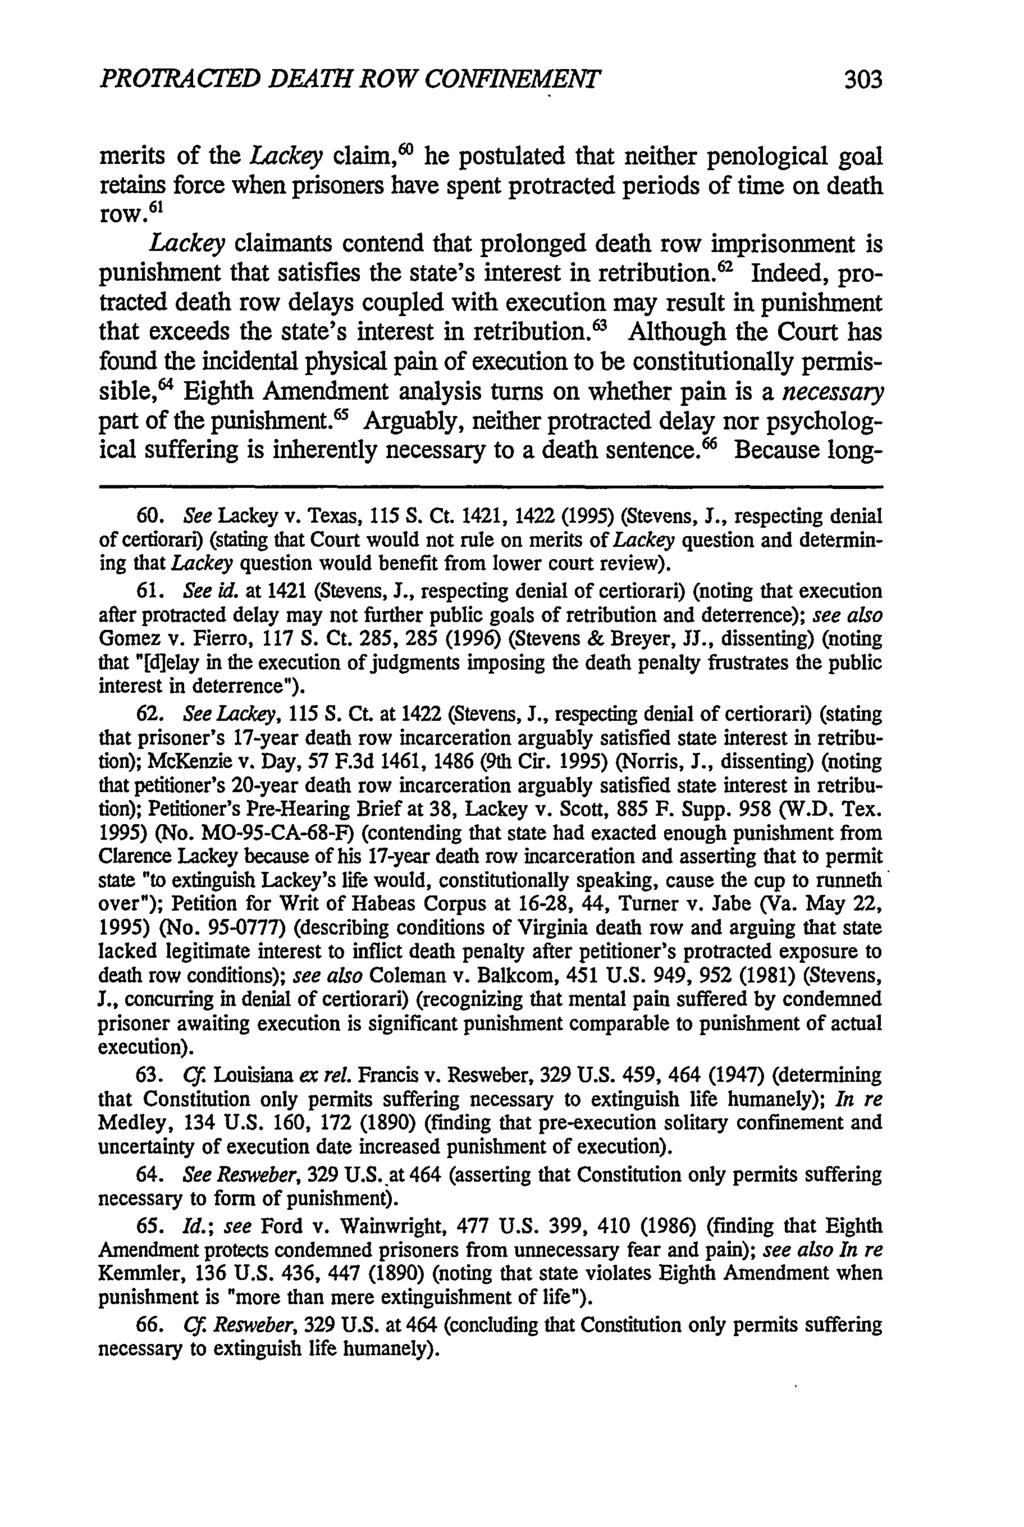 PROTRACTED DEATH ROW CONFINEMENT merits of the Lackey claim, 6 ' he postulated that neither penological goal retains force when prisoners have spent protracted periods of time on death row.